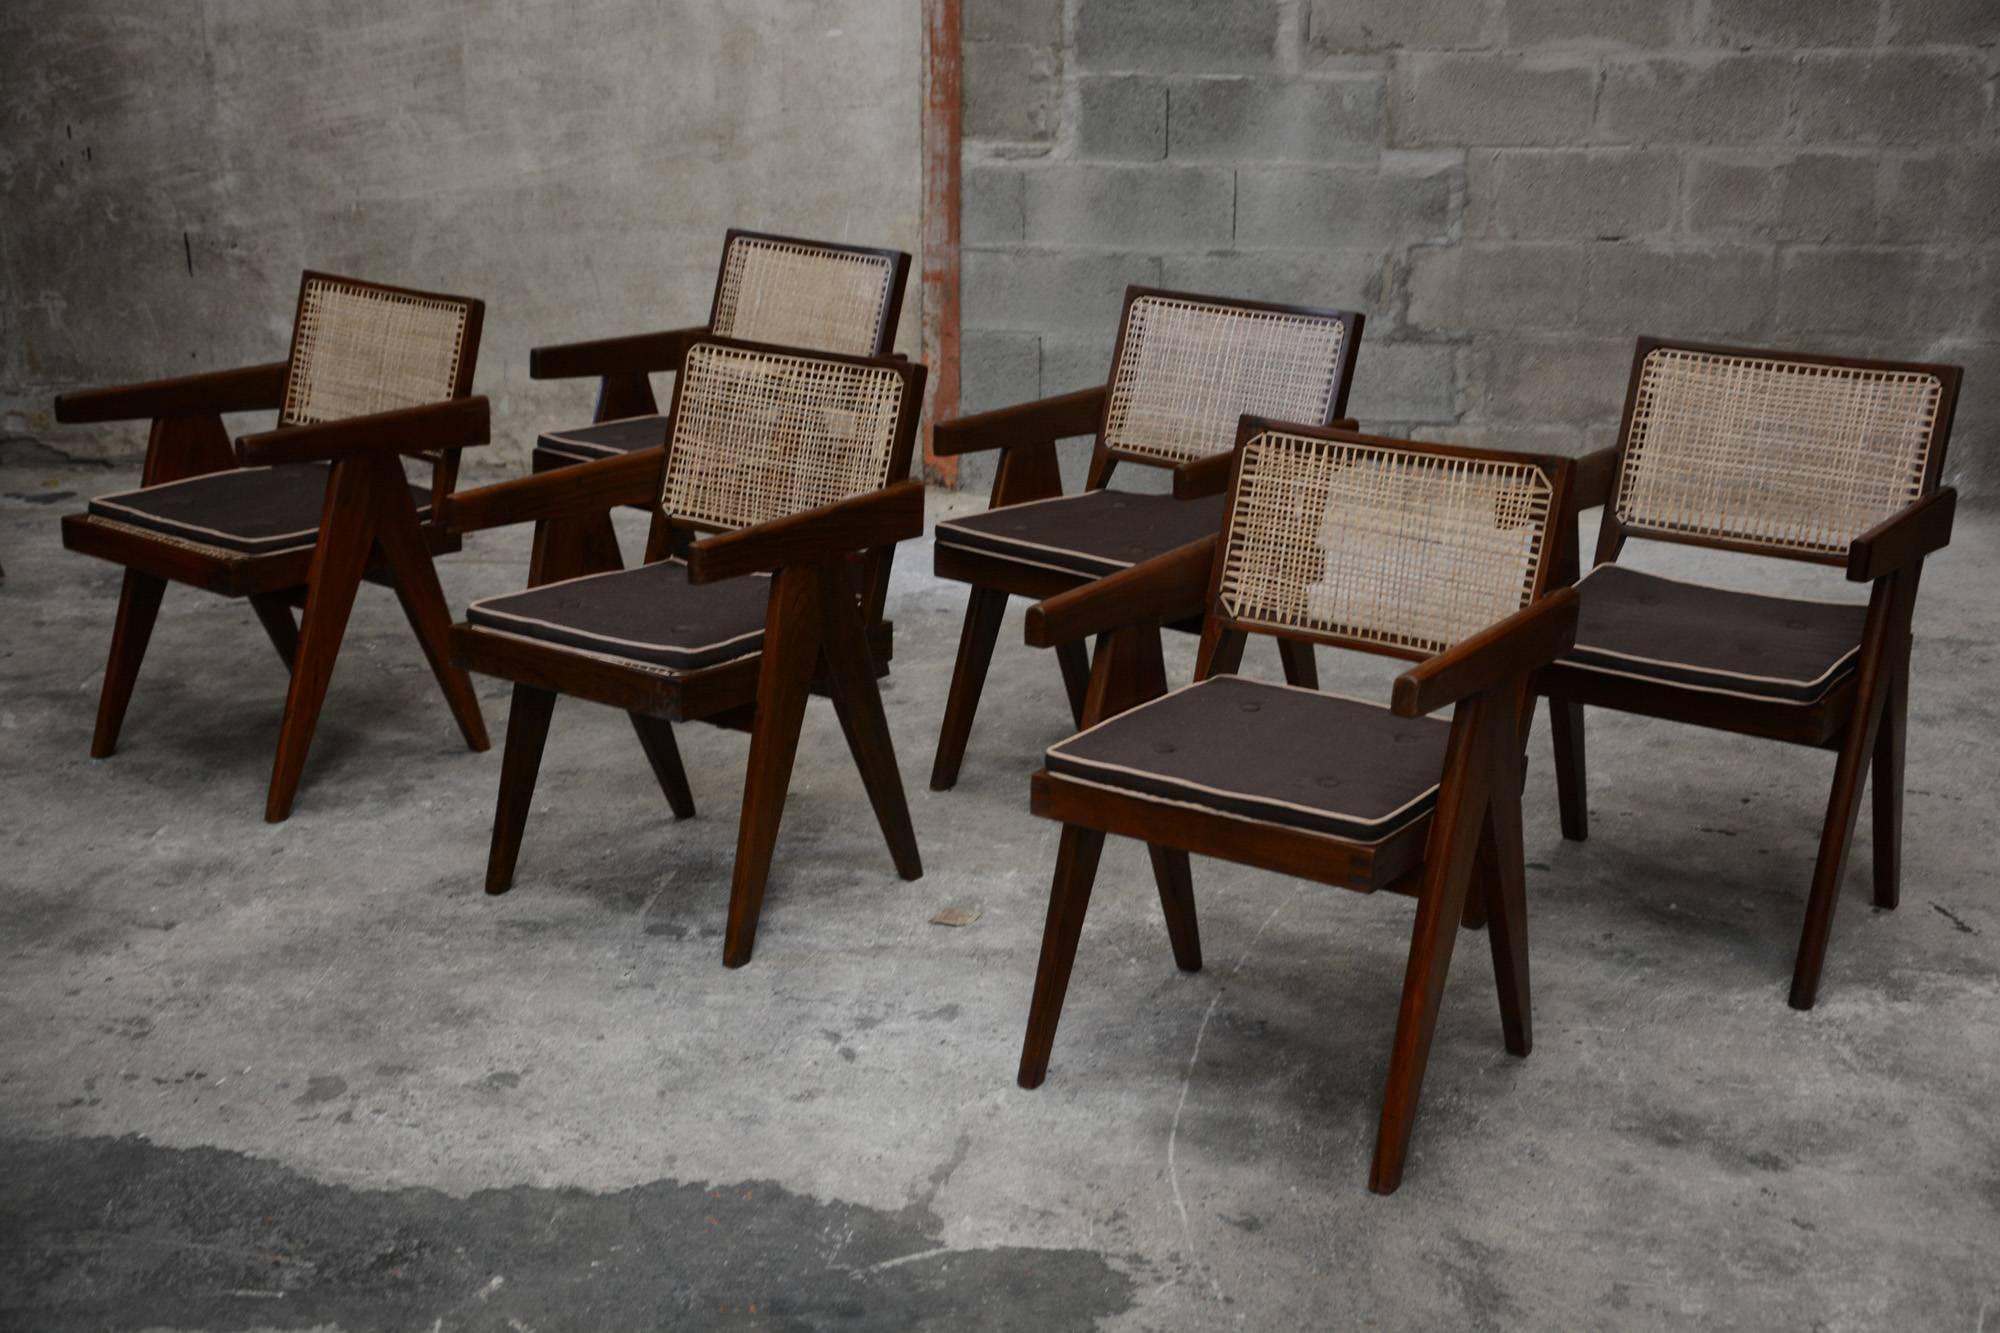 Pierre Jeanneret, set of six cane and teak wood office armchairs from administrative buildings in Chandigarh, India. Back attached to the seat. Teak, woven cane and upholstered seat cushion featuring cloth covering. See photo before restoration when